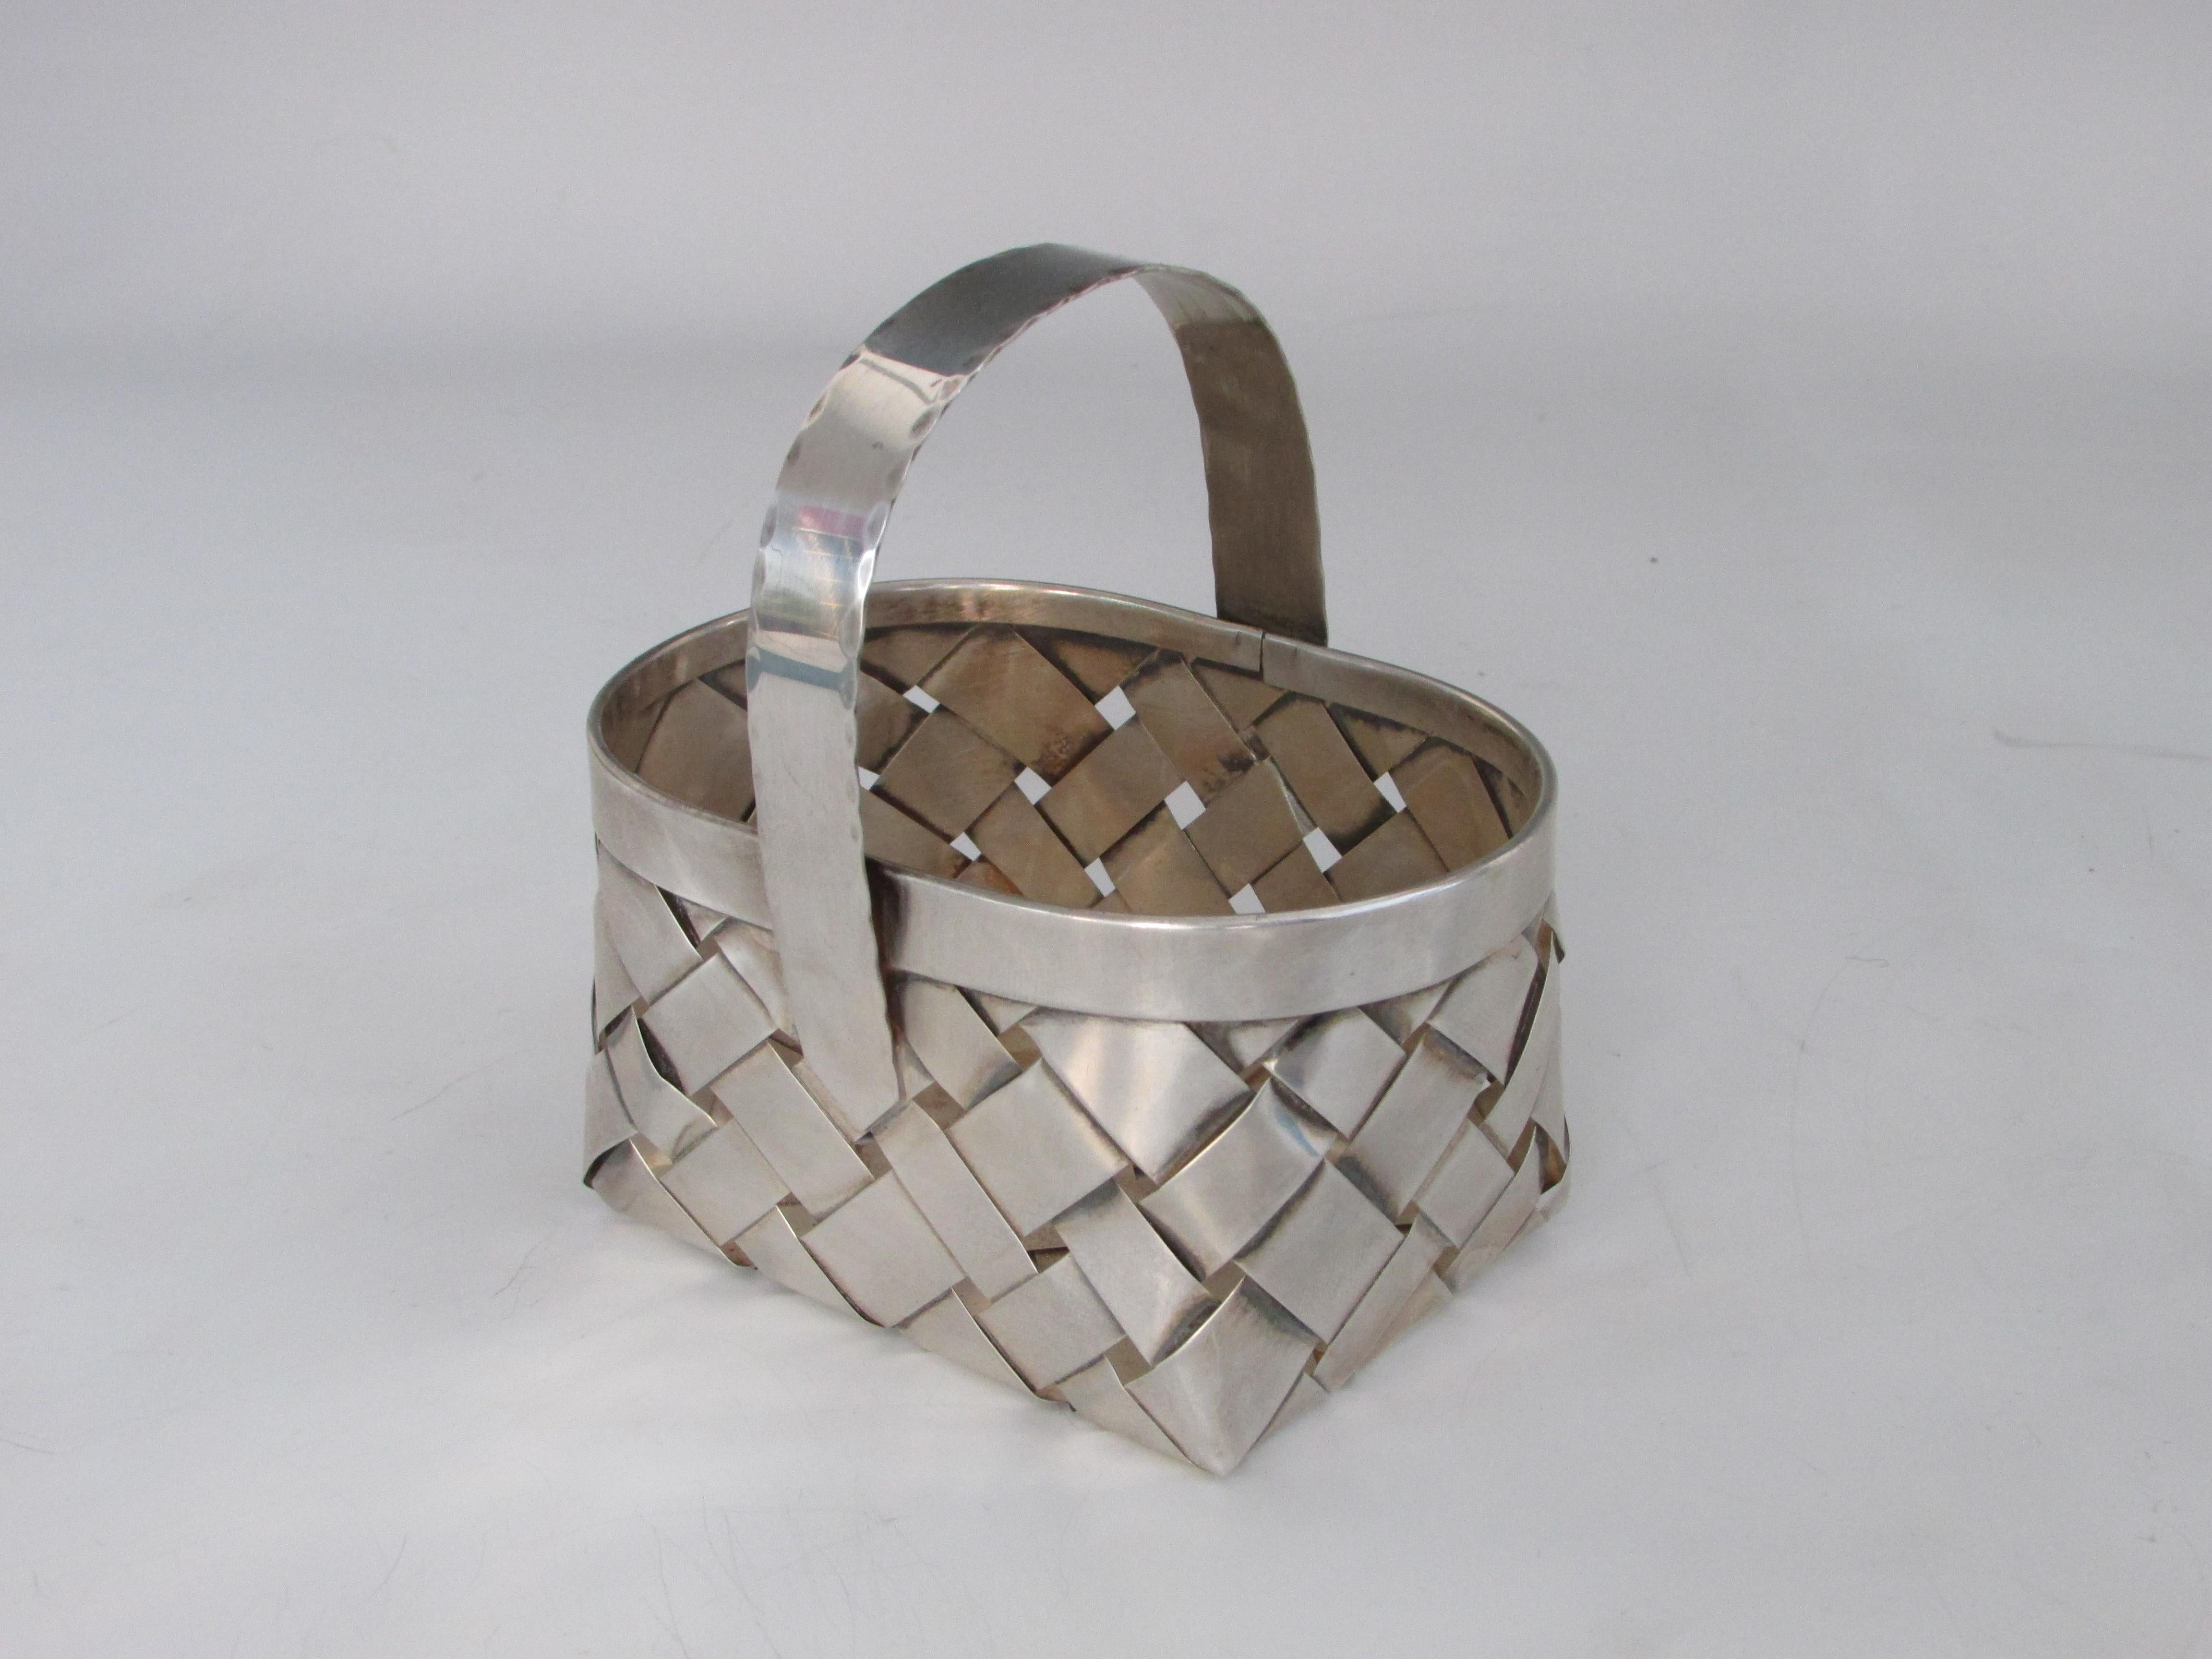 Basket made of woven sterling silver. Marked Cartier hand made sterling.